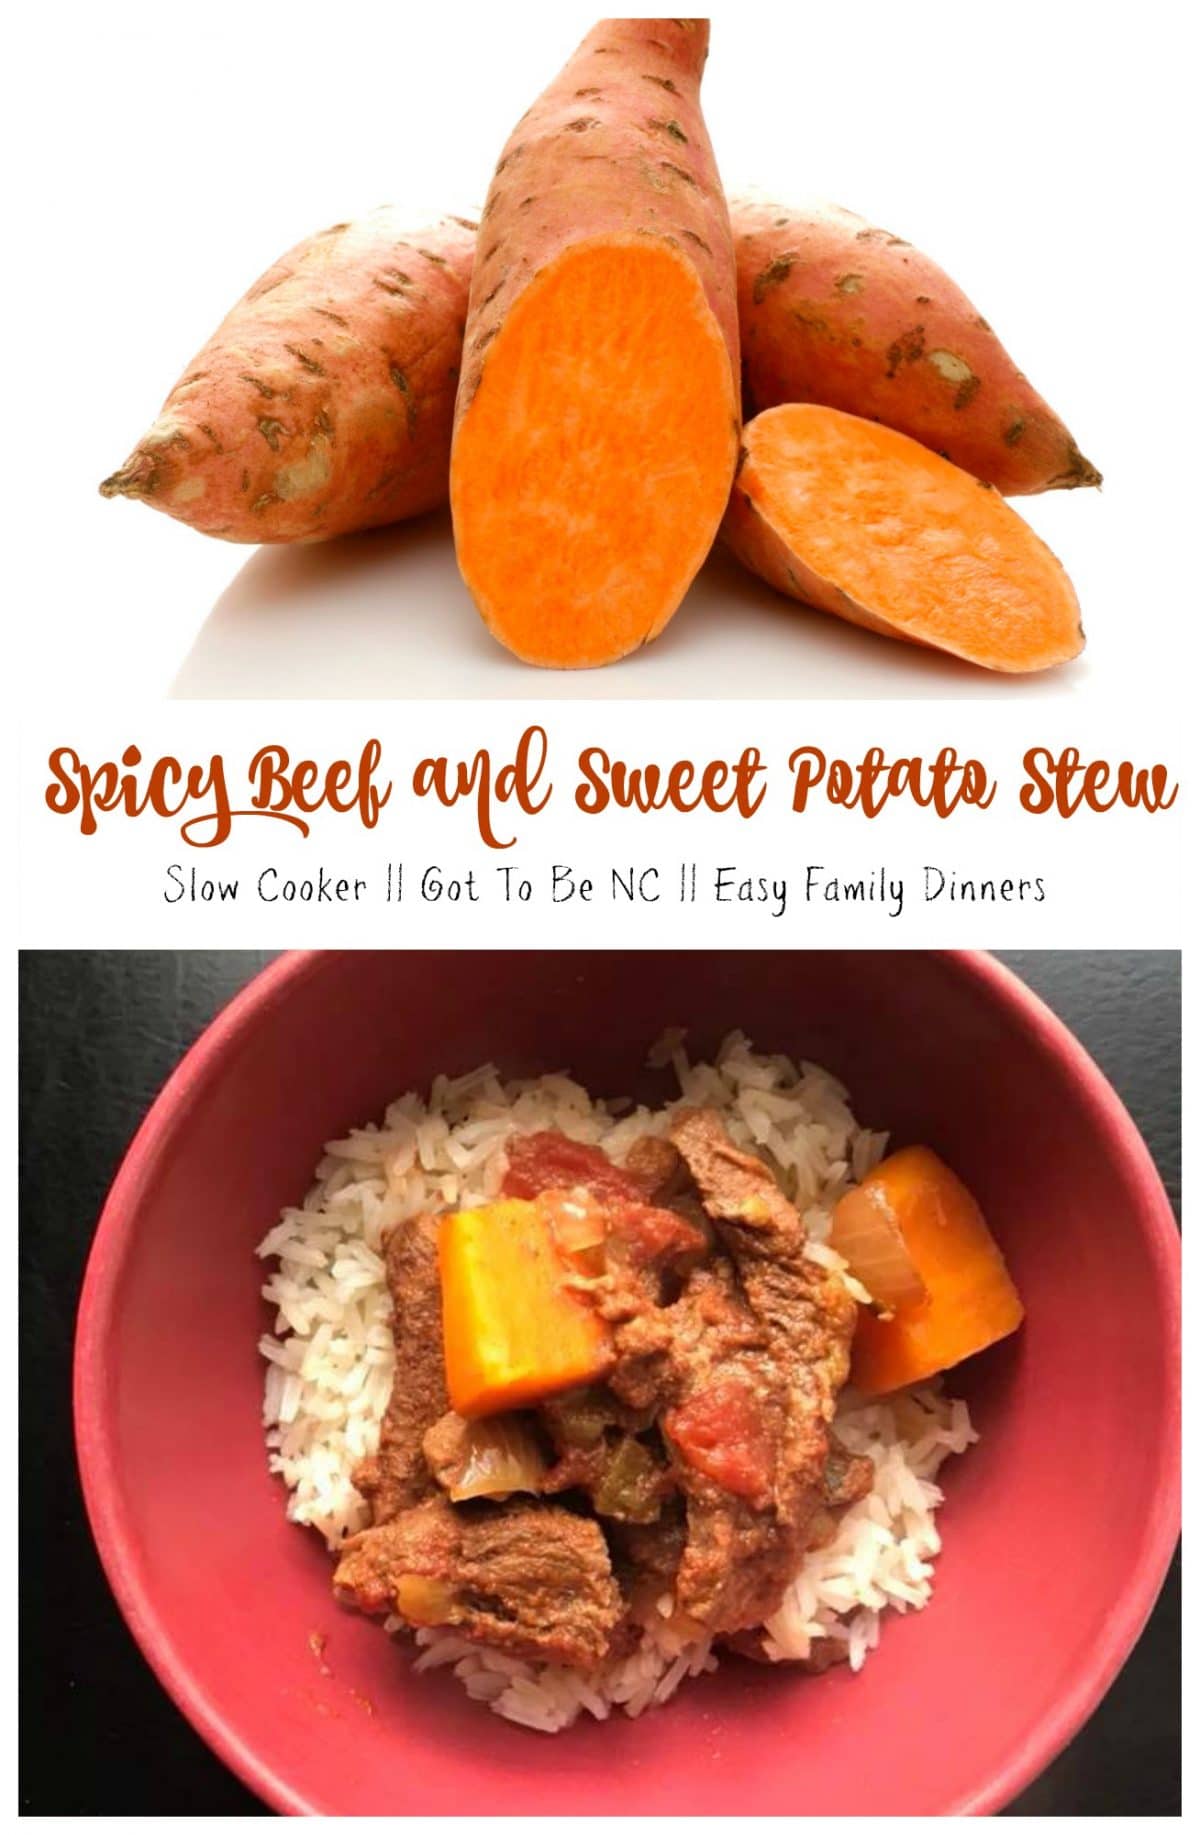 Slow Cooker Spicy Beef and Sweet Potato Stew || Erin Brighton | Got To Be NC | NC Beef | NC Sweet Potatoes | Easy Family Meals